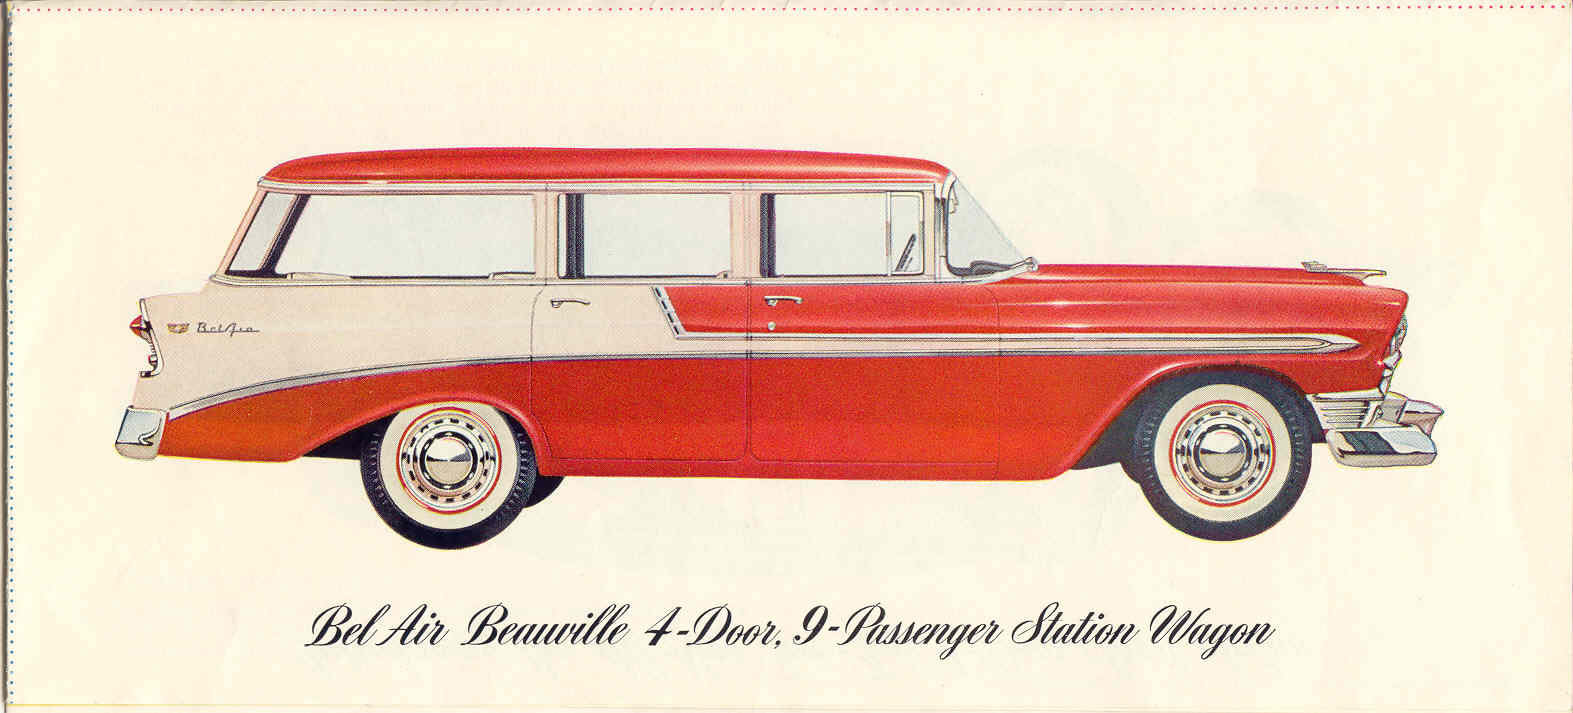 1956 Chevrolet Brochure Page 6